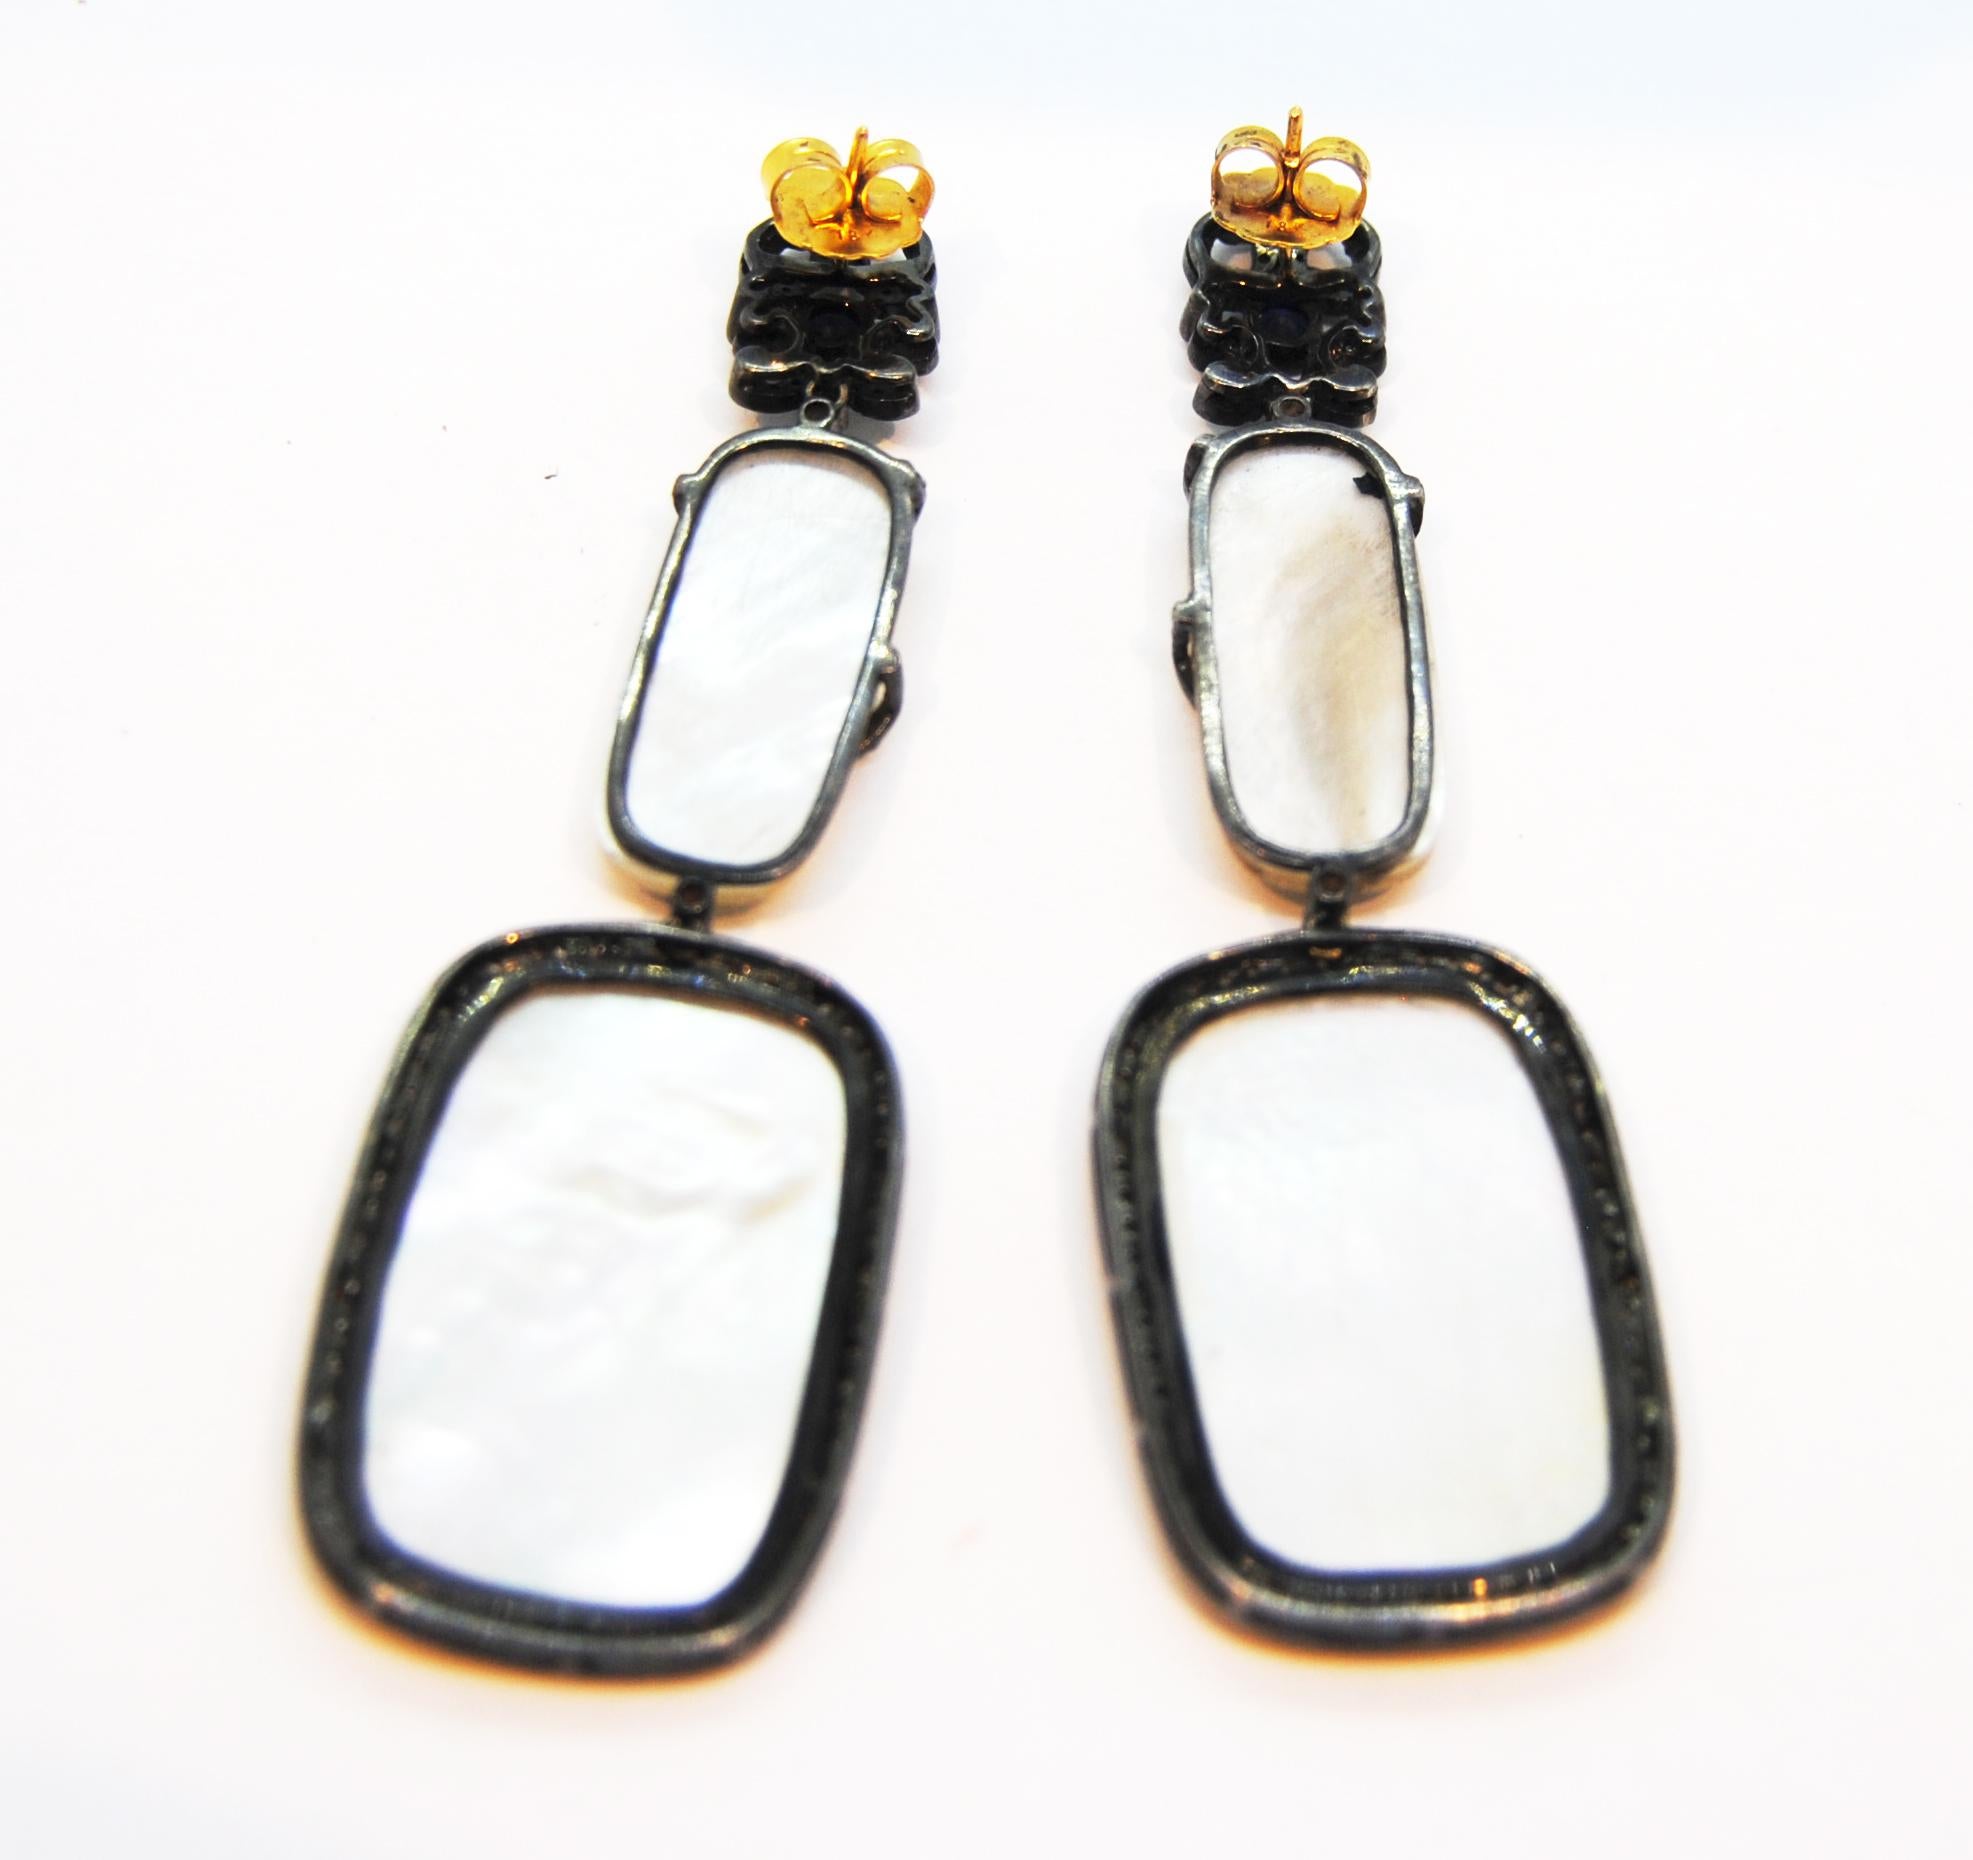 Irama Pradera is a Young designer from Spain that searches always for the best gems and combines classic with contemporary mounting and styles. 
Sleekly crafted in 18K yellow gold and silver  these classic Oriental  inspiration white rutile dangle